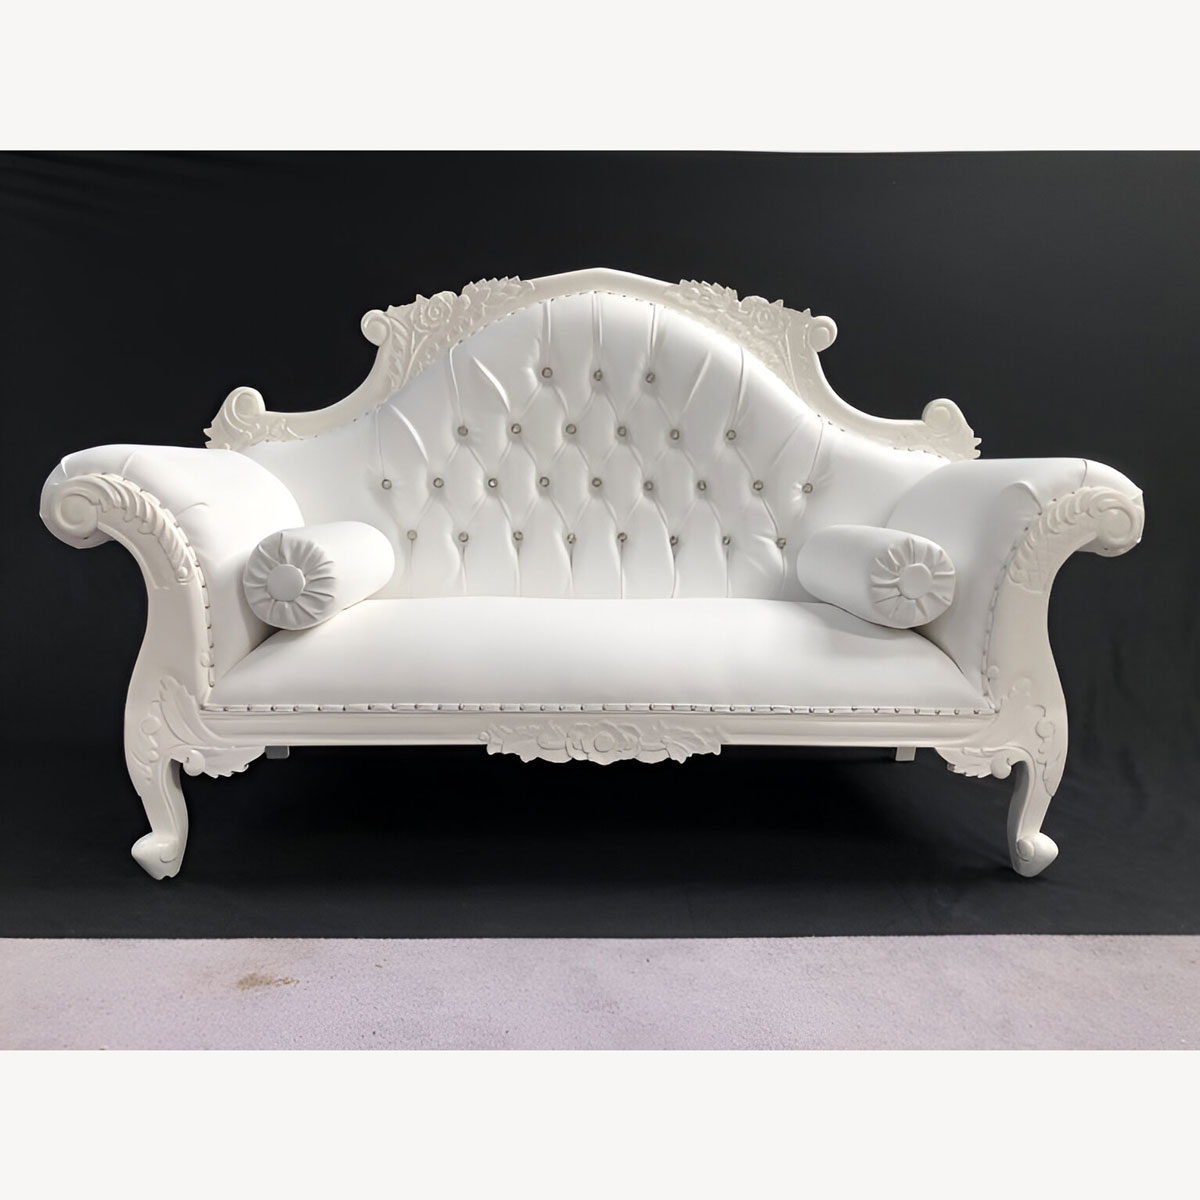 Charles Louis Cuddler Love Seat Chaise Sofa In Gloss White Frame With White Faux Leather And Crystals 1 - Hampshire Barn Interiors - Charles Louis Cuddler Love Seat Chaise Sofa In Gloss White Frame With White Faux Leather And Crystals -